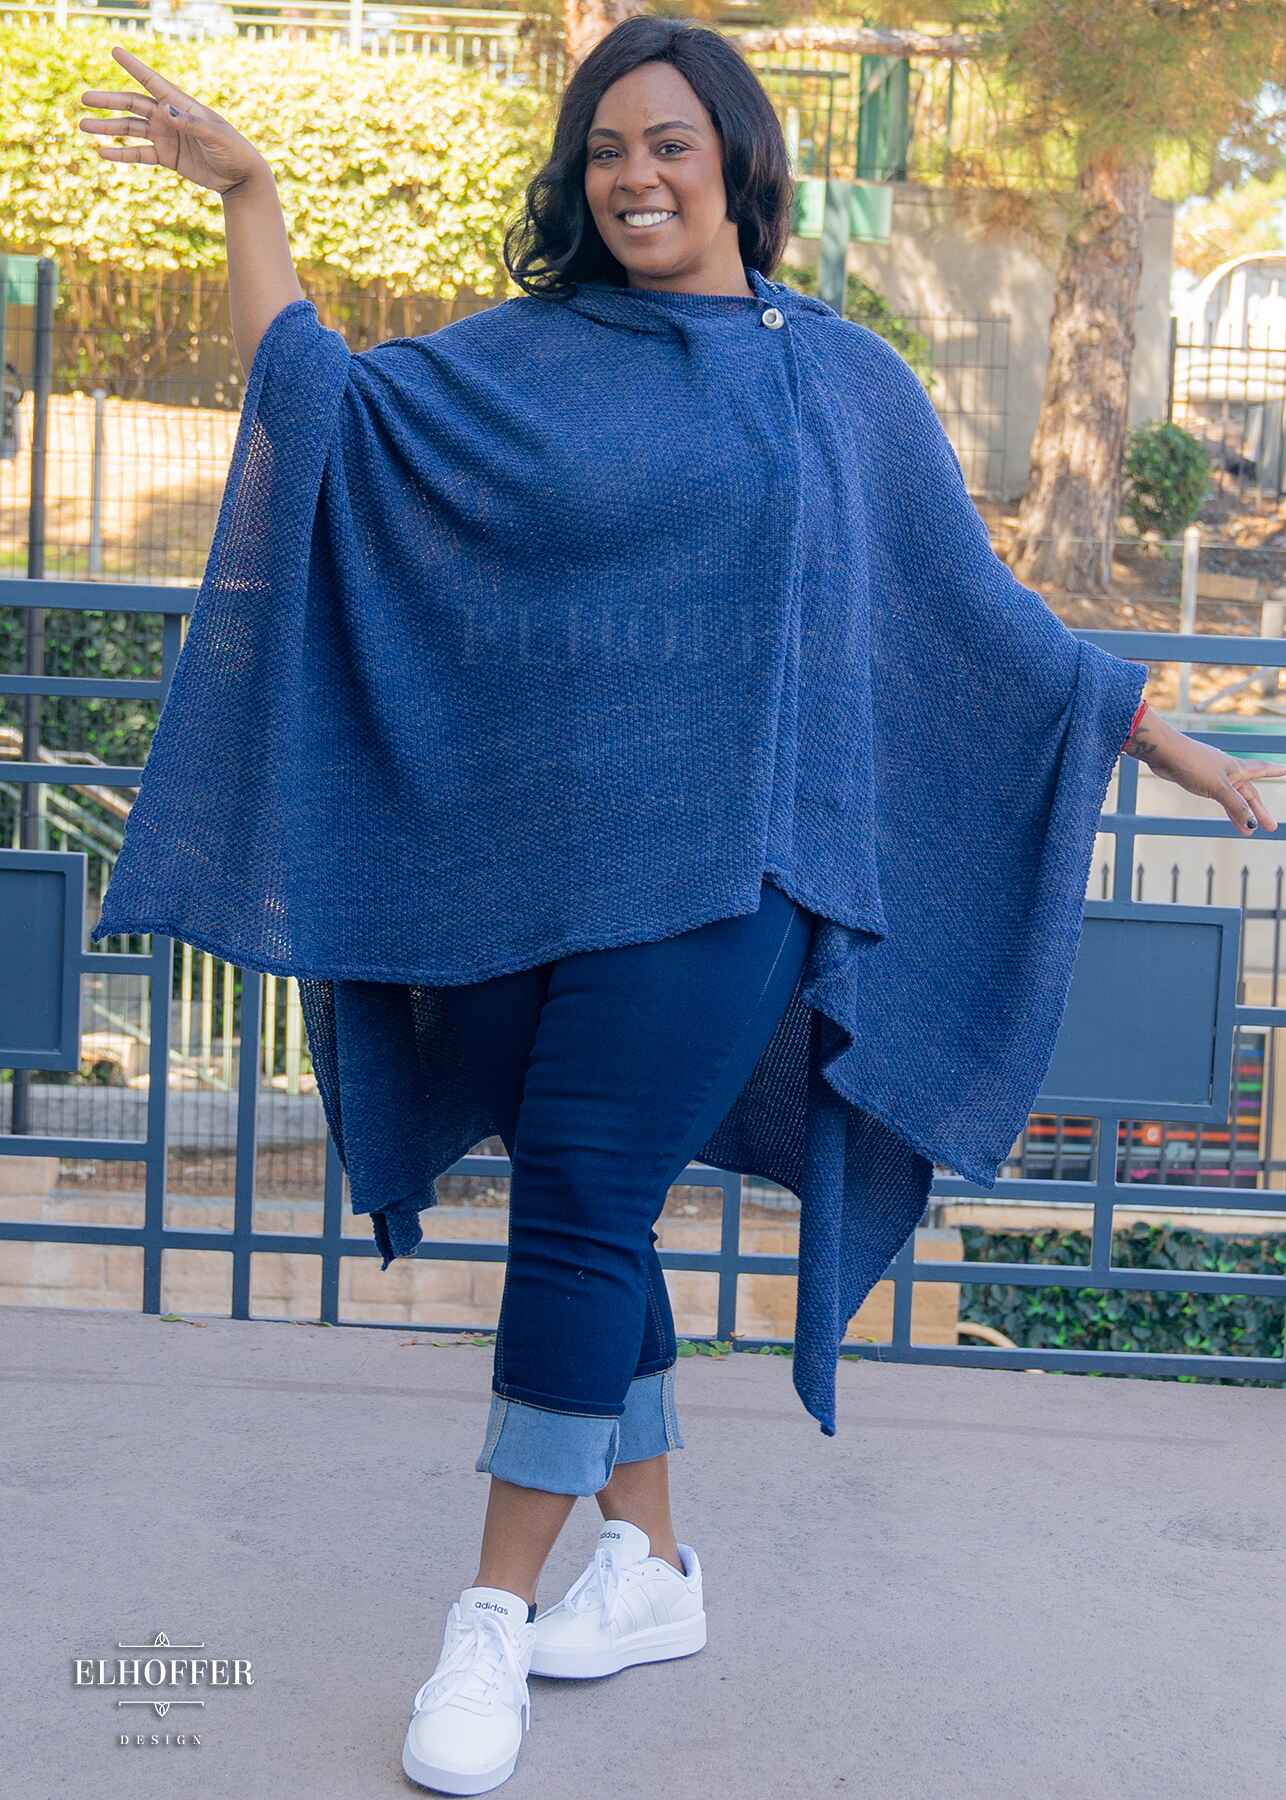 Essential Nomad Cape - Heathered Navy